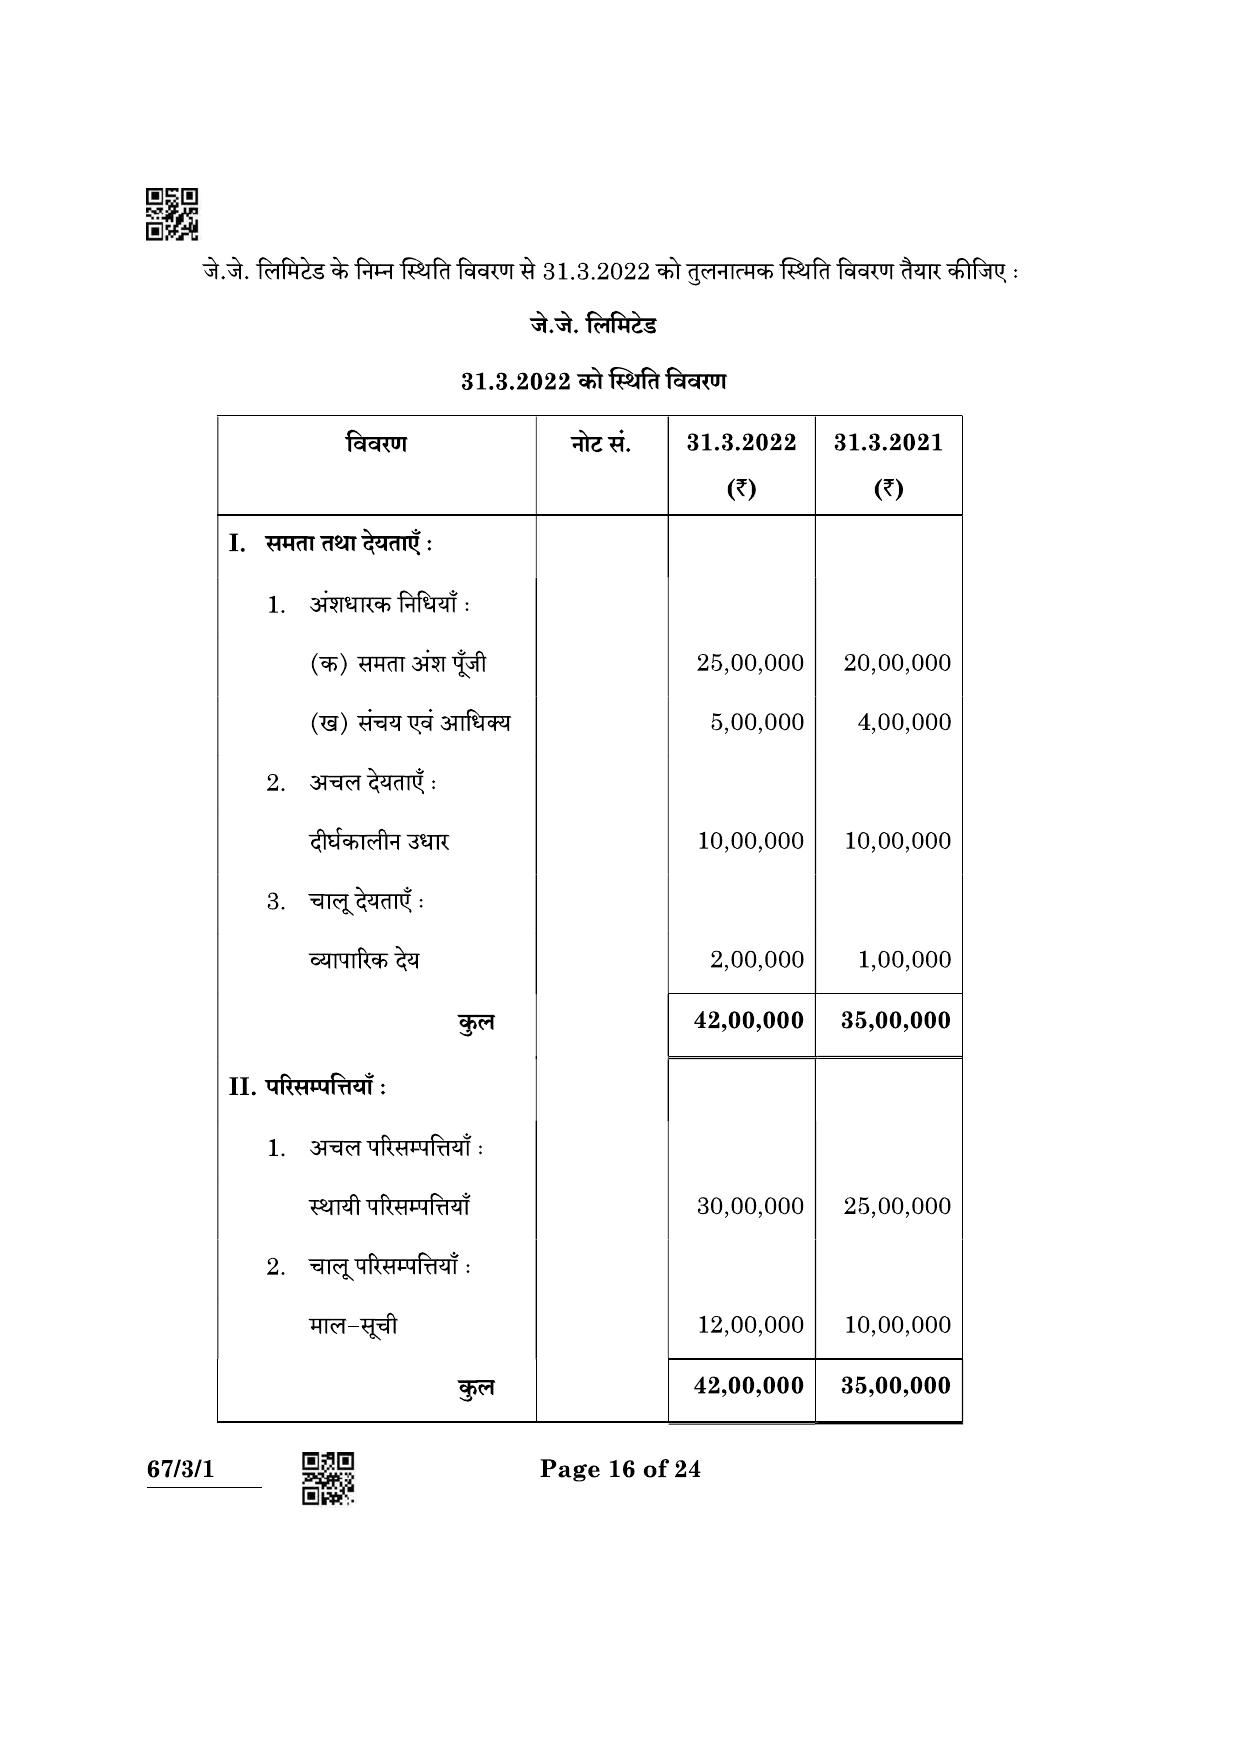 CBSE Class 12 67-3-1 Accountancy 2022 Question Paper - Page 16